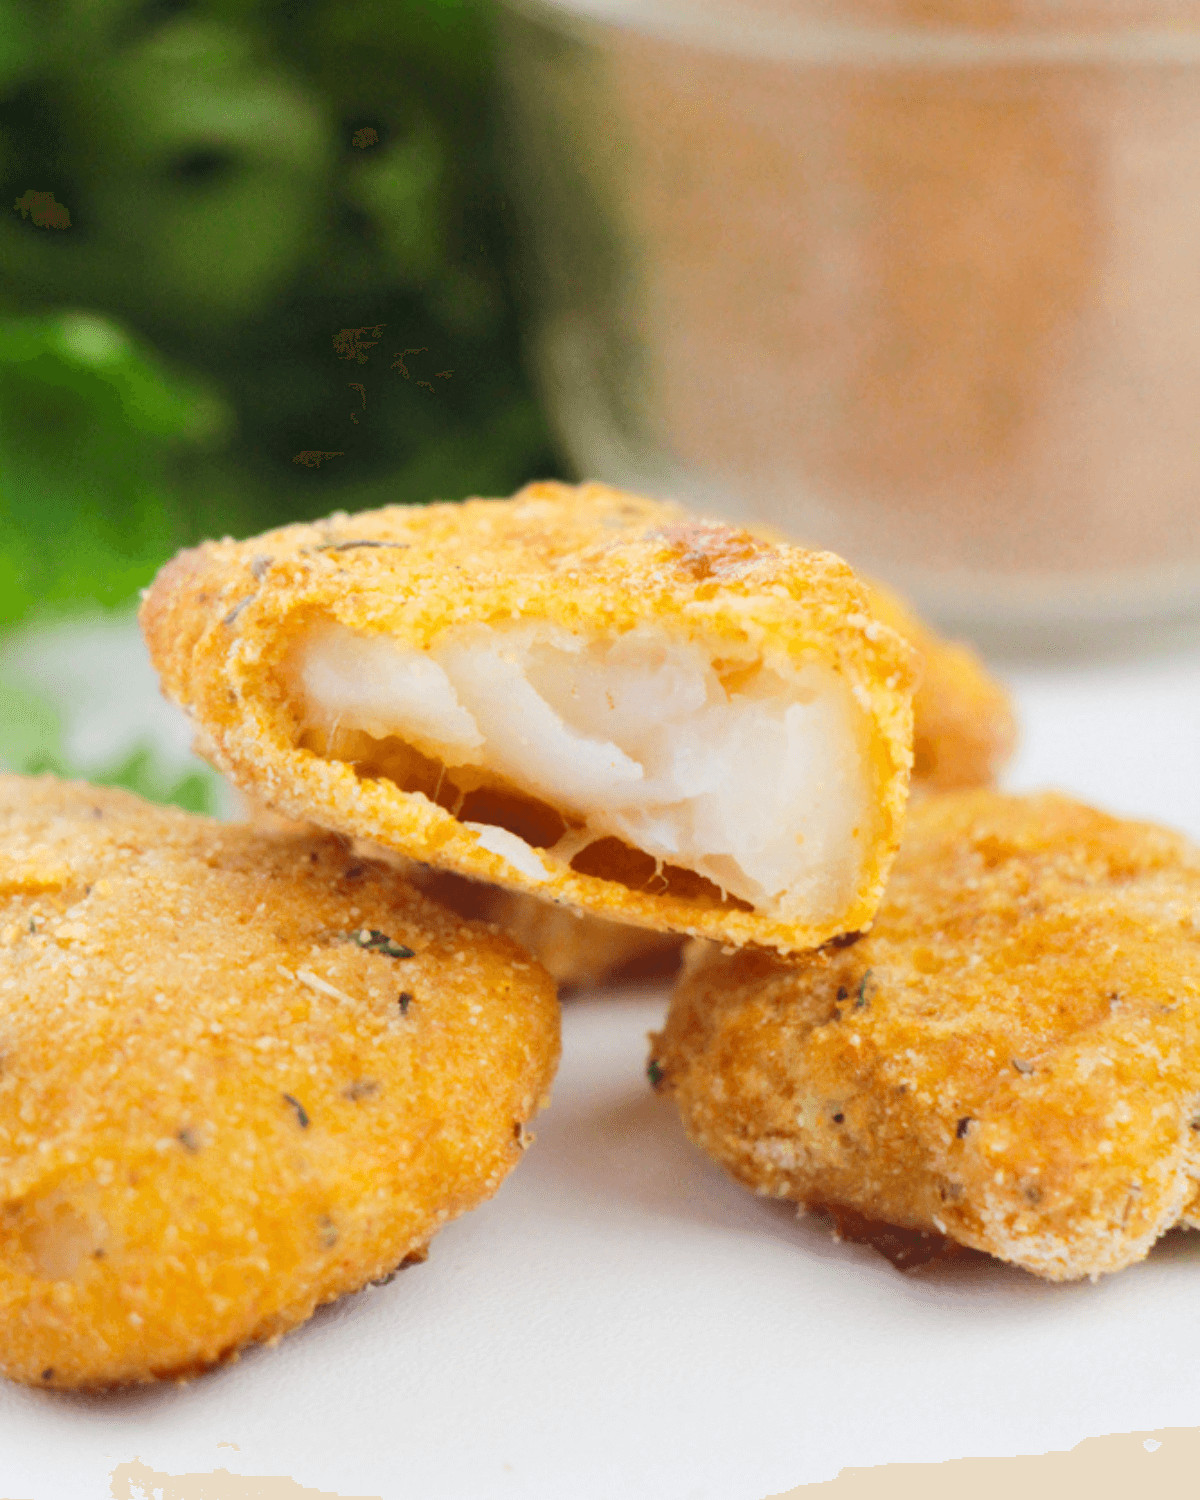 Catfish nuggets from the air fryer.